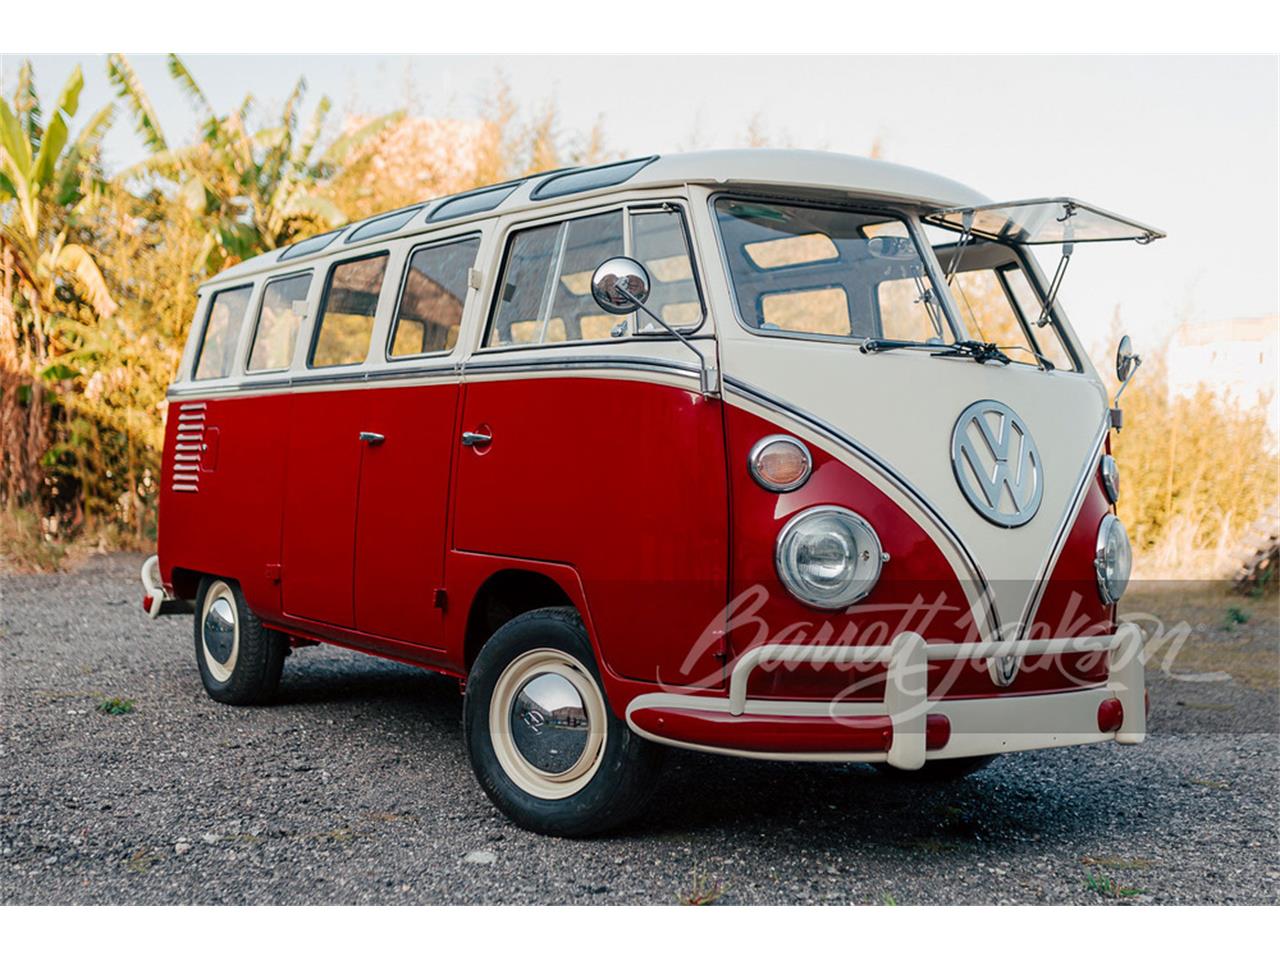 For Sale at Auction: 1964 Volkswagen Bus in Scottsdale, Arizona for sale in Scottsdale, AZ